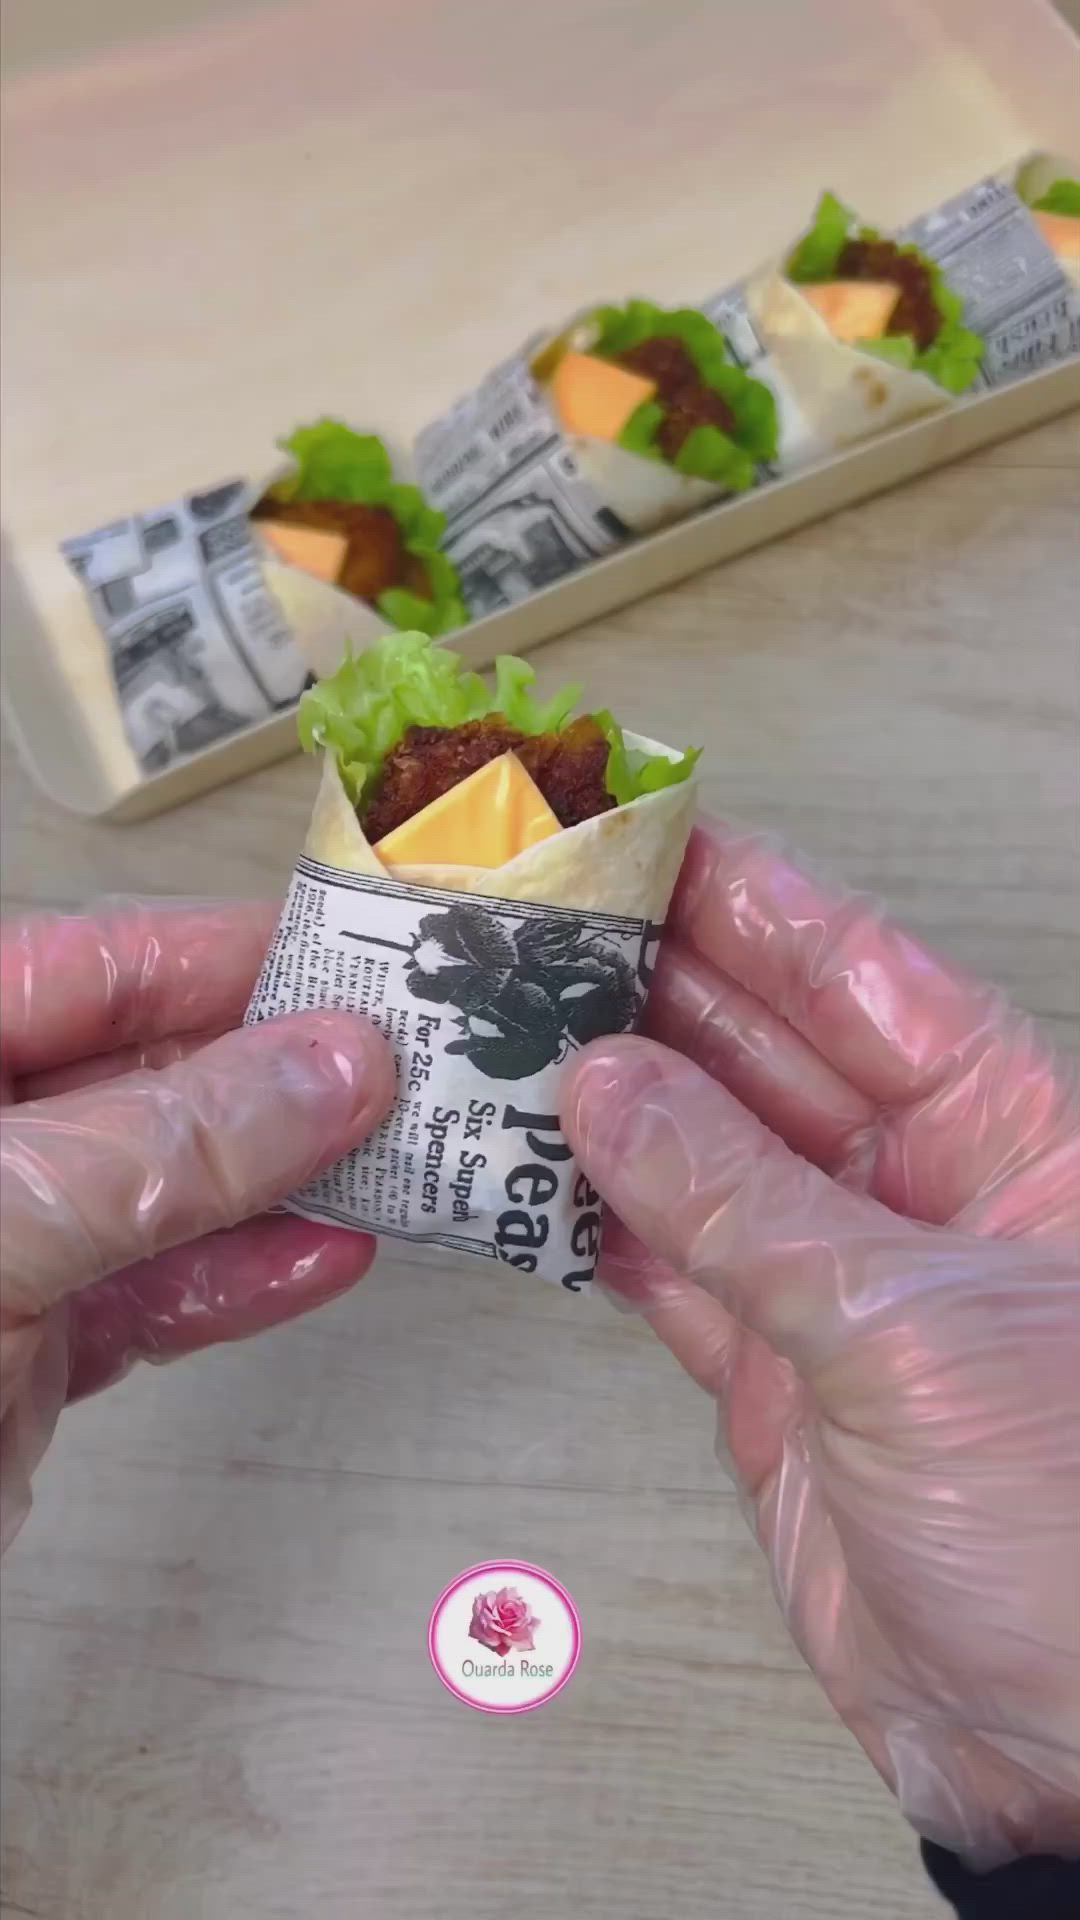 This may contain: two hands are holding food wrapped in plastic on a wooden table next to another person's hand